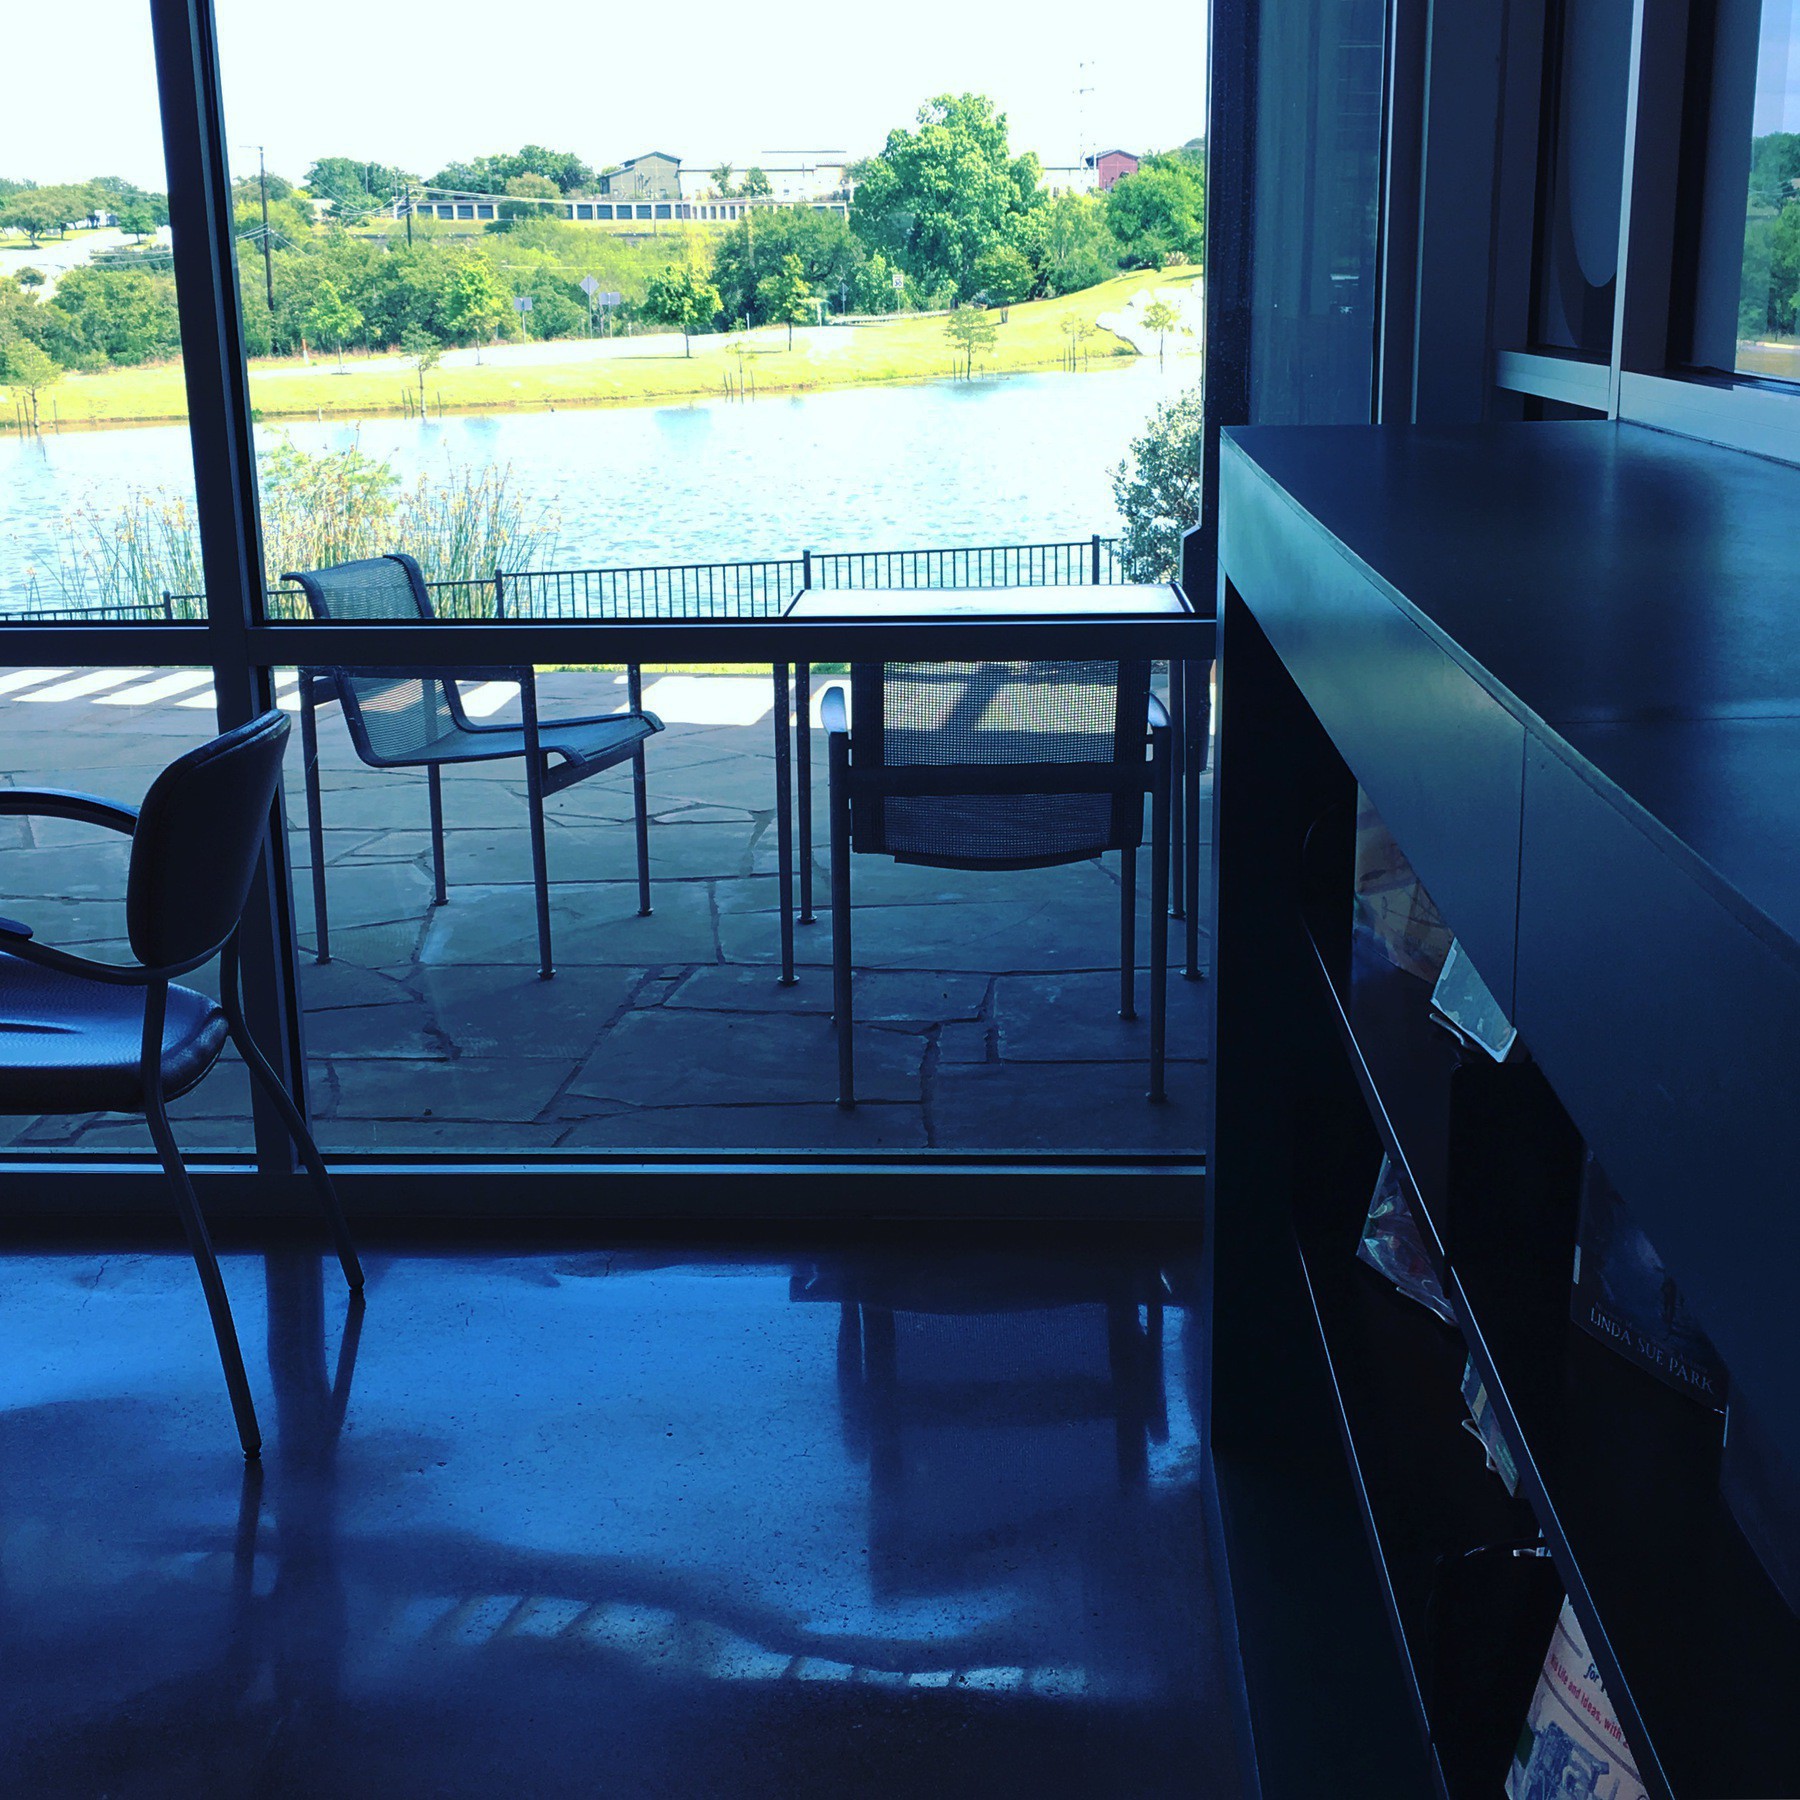 Pond view at Lake Travis Community Library